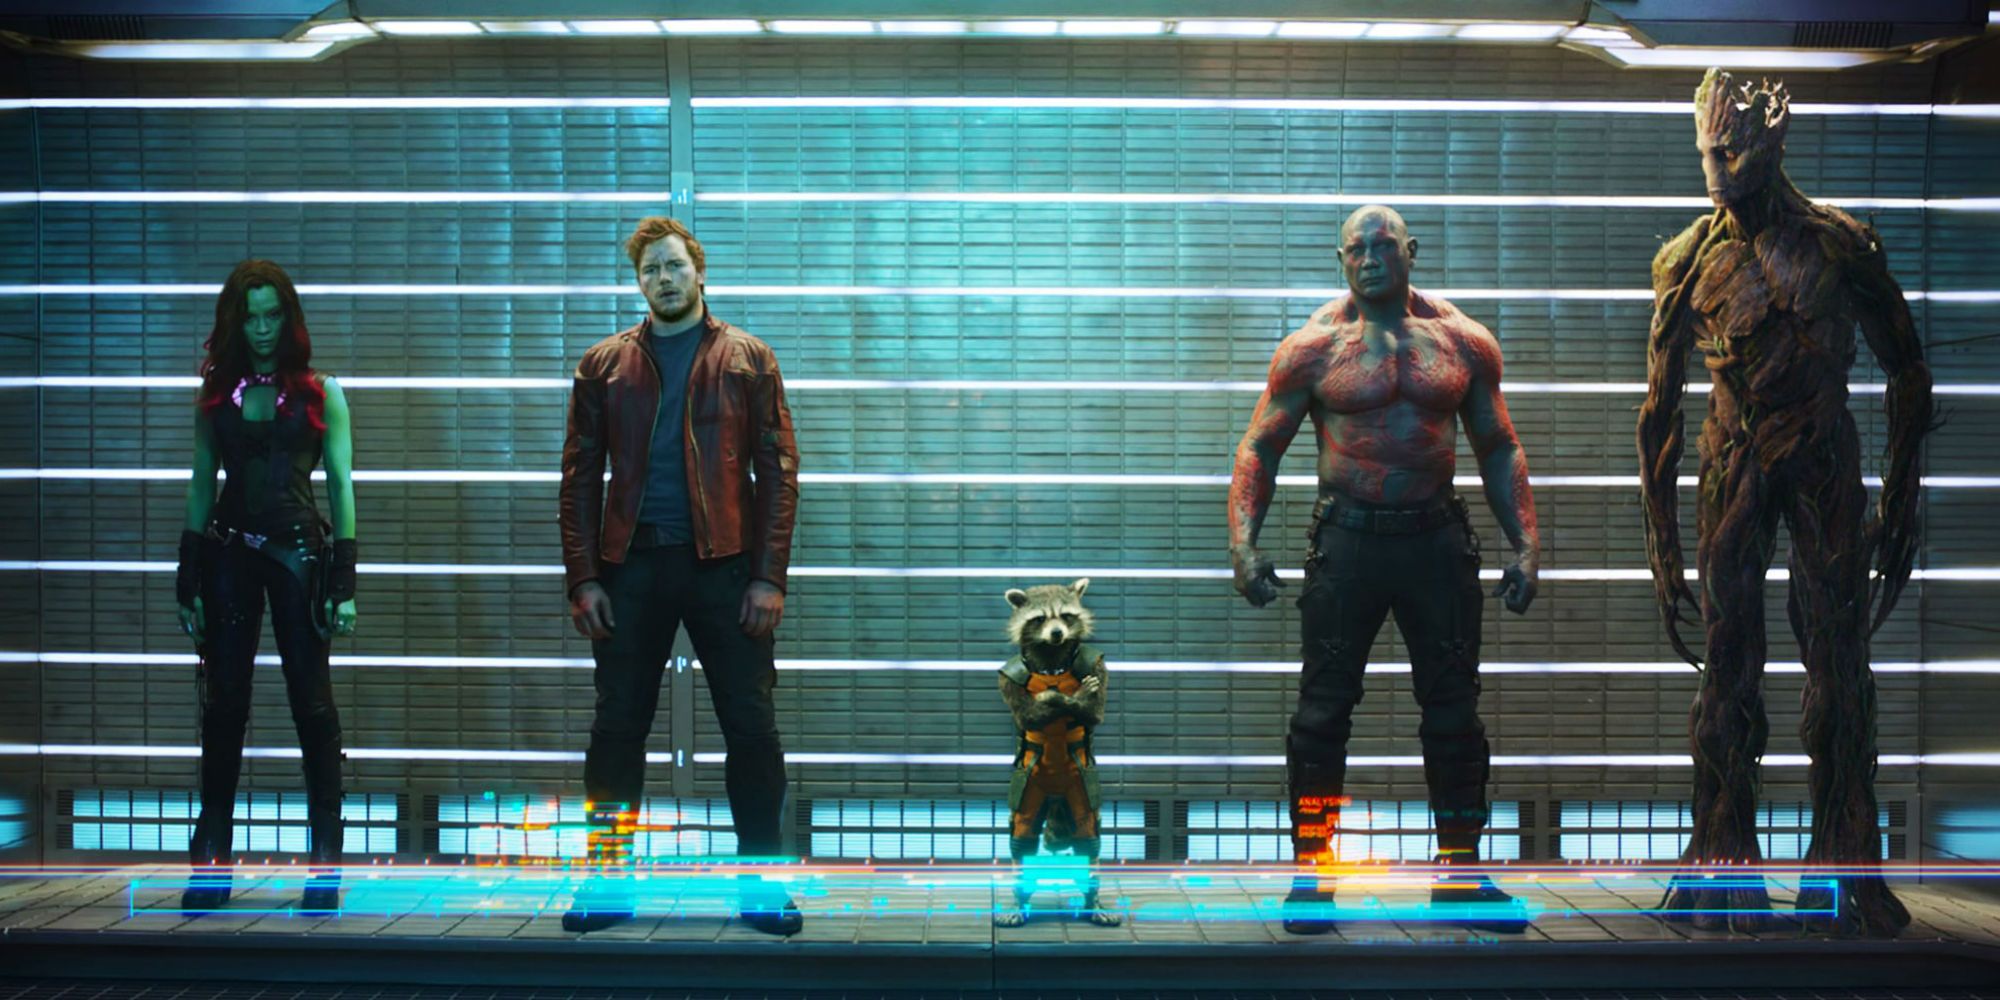 The Guardians Of The Galaxy arrested together